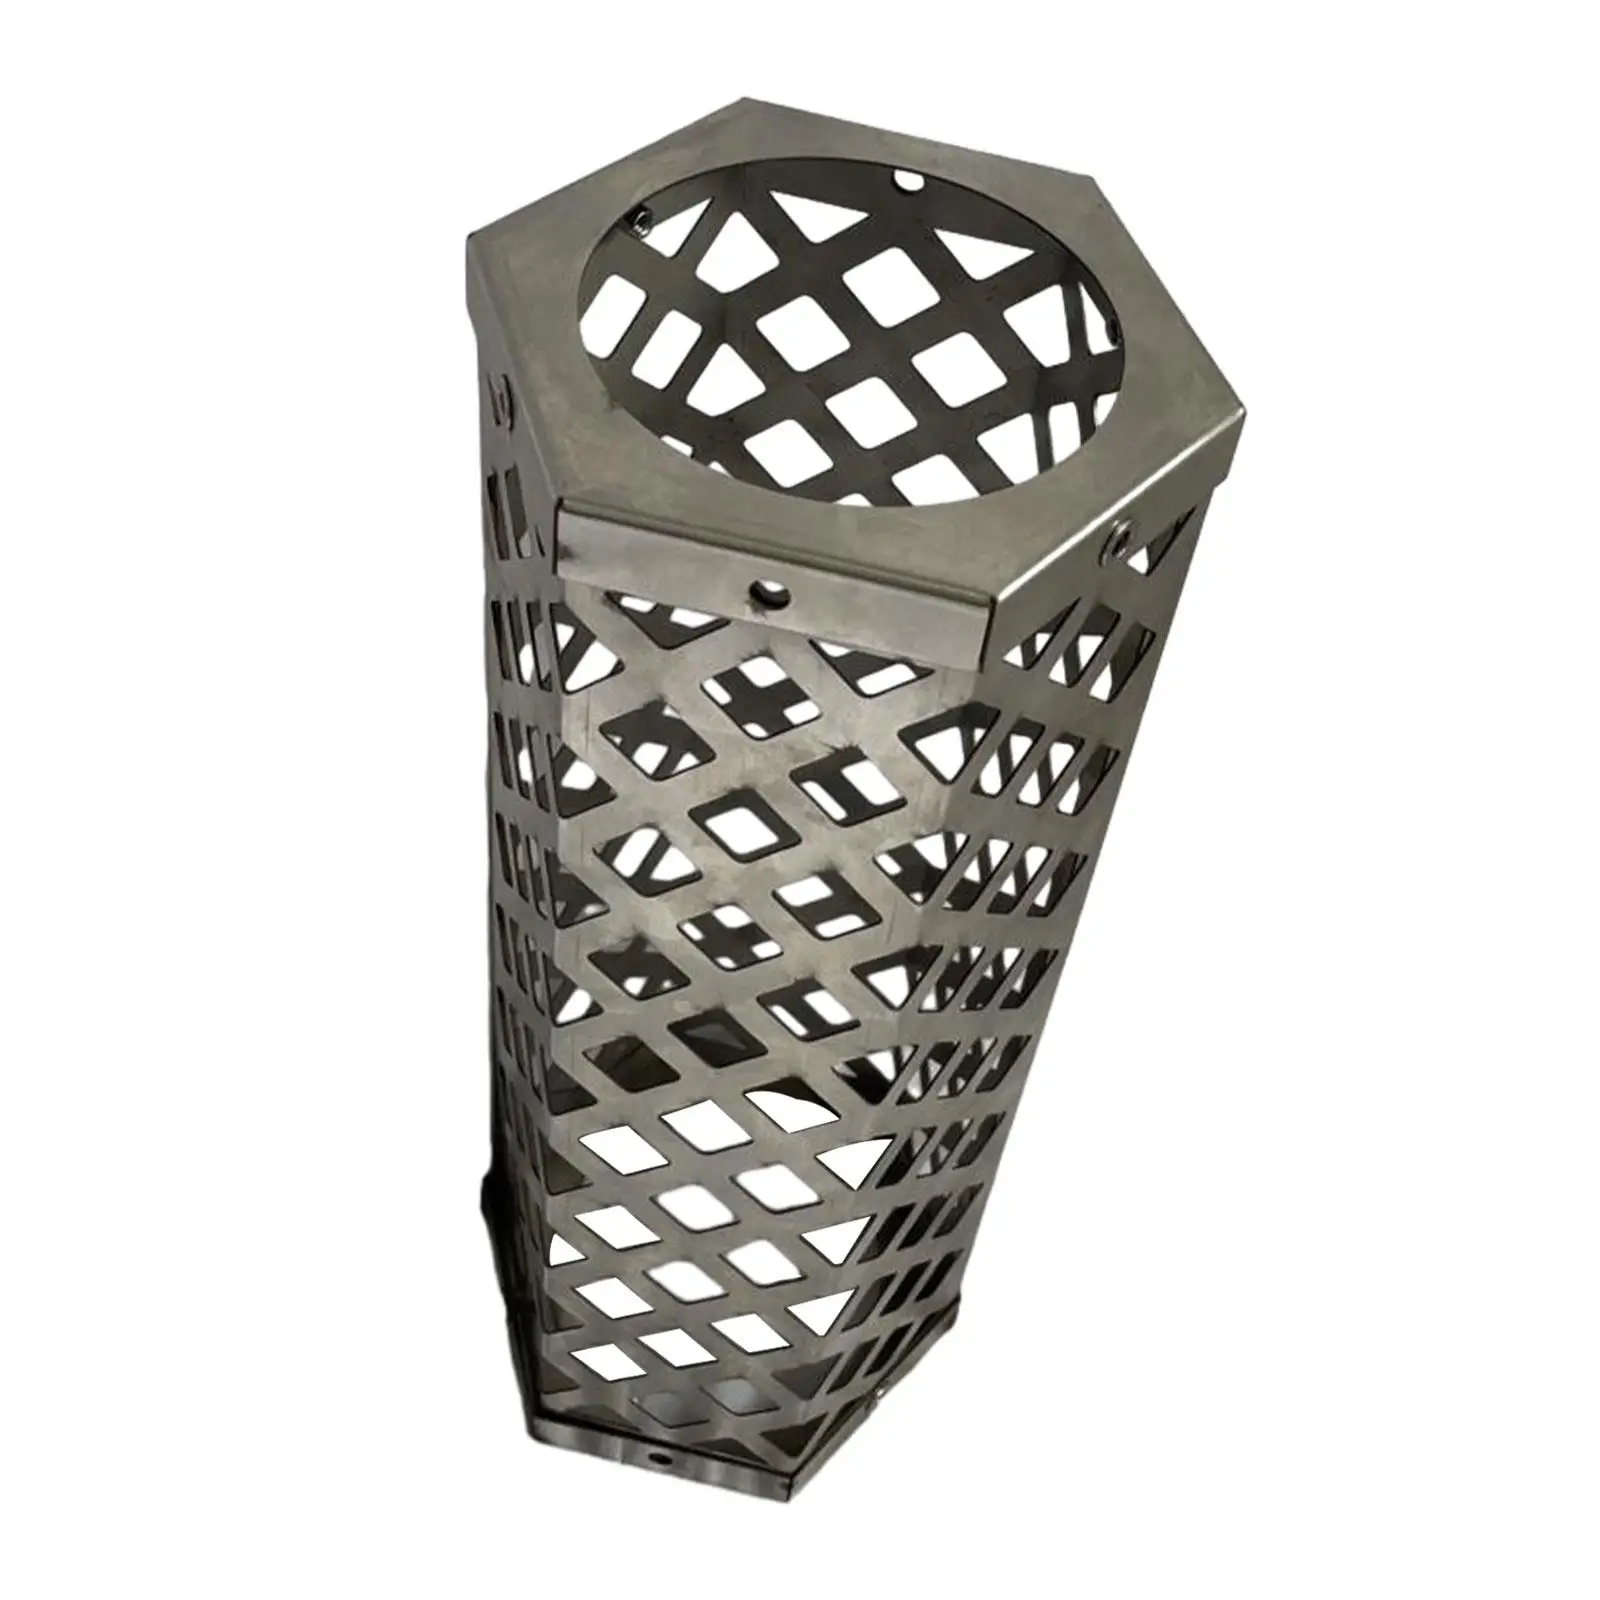 

Chimney Spark Arrestor Screen Fireplace Stainless Steel Chimney Anti Scalding Net for Outdoor Camping Hiking Winter Heater